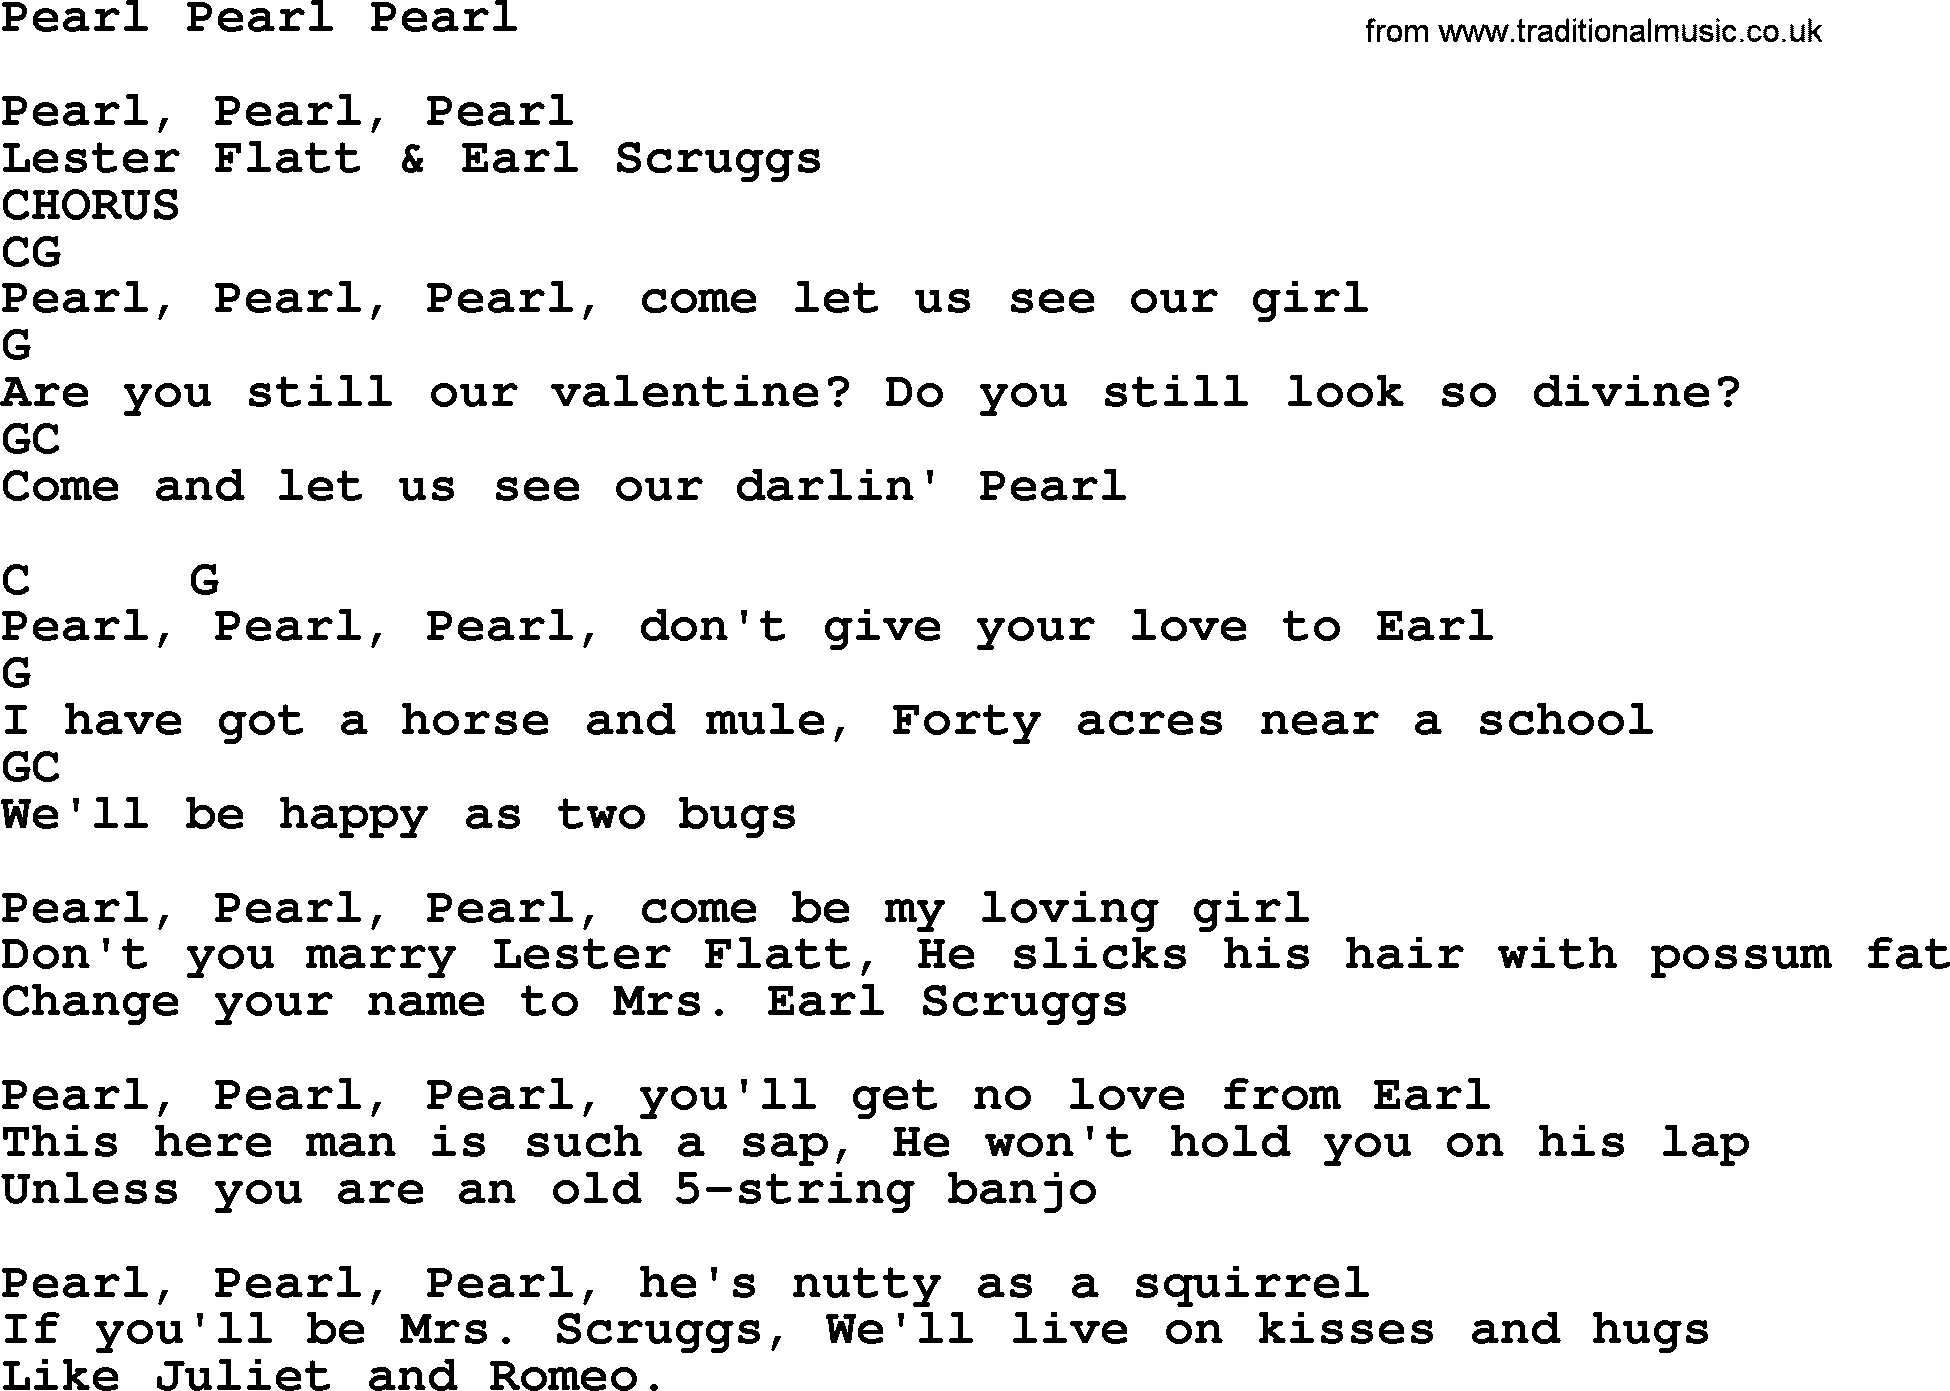 Bluegrass song: Pearl Pearl Pearl, lyrics and chords